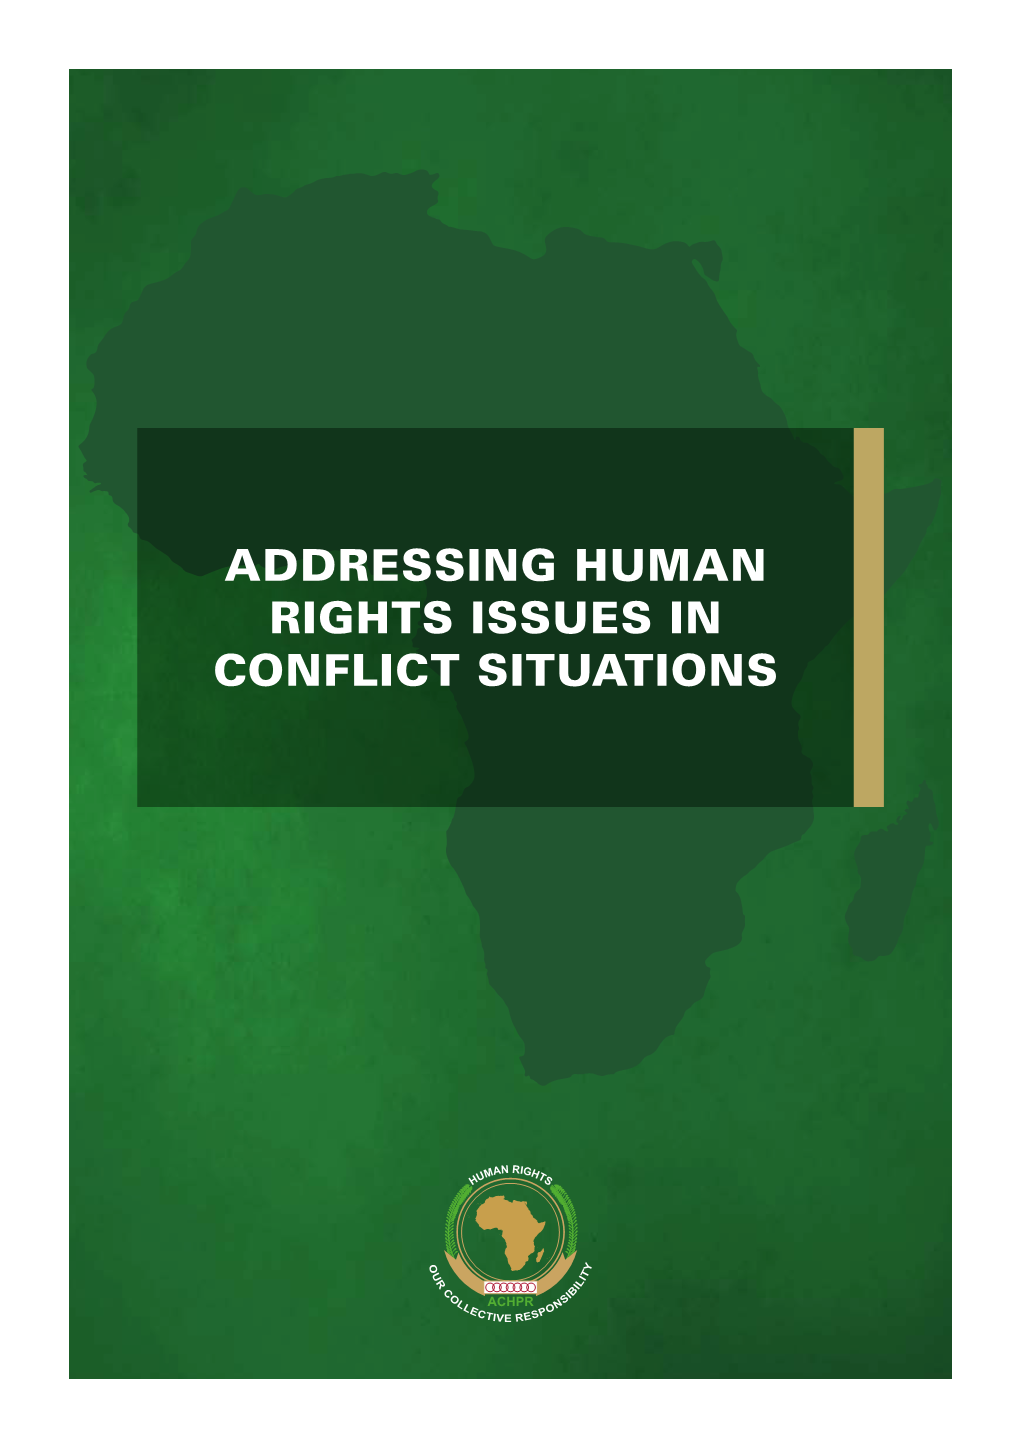 Addressing Human Rights Issues in Conflict Situations